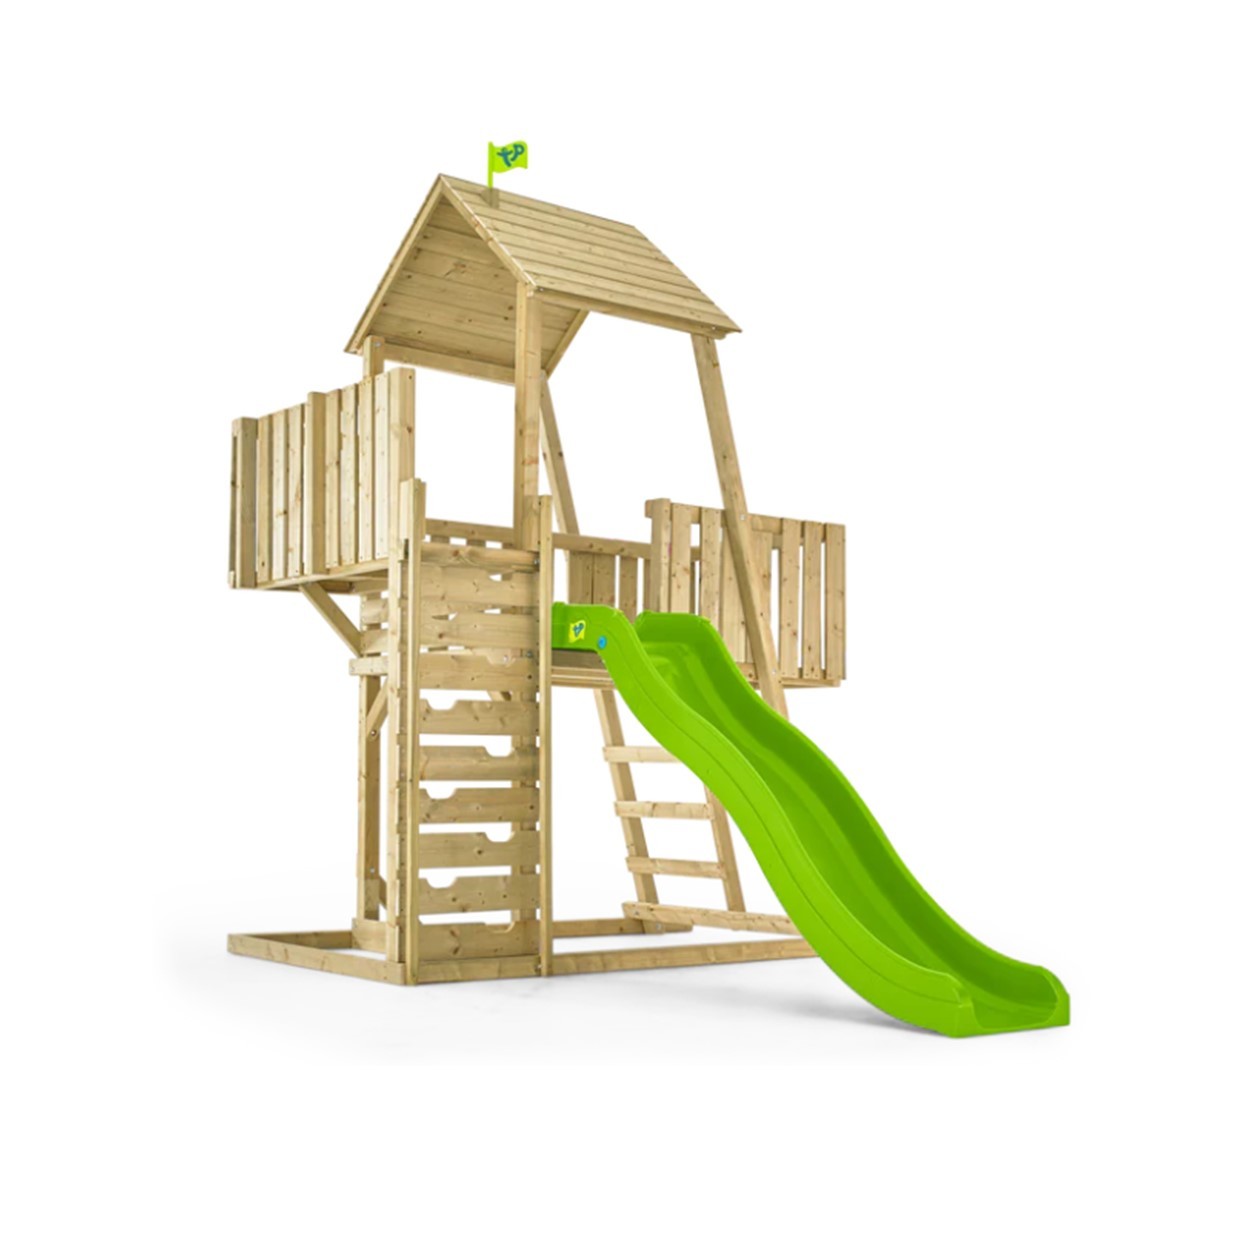 TP Kingswood 2 Tower with Crazywavy Slide